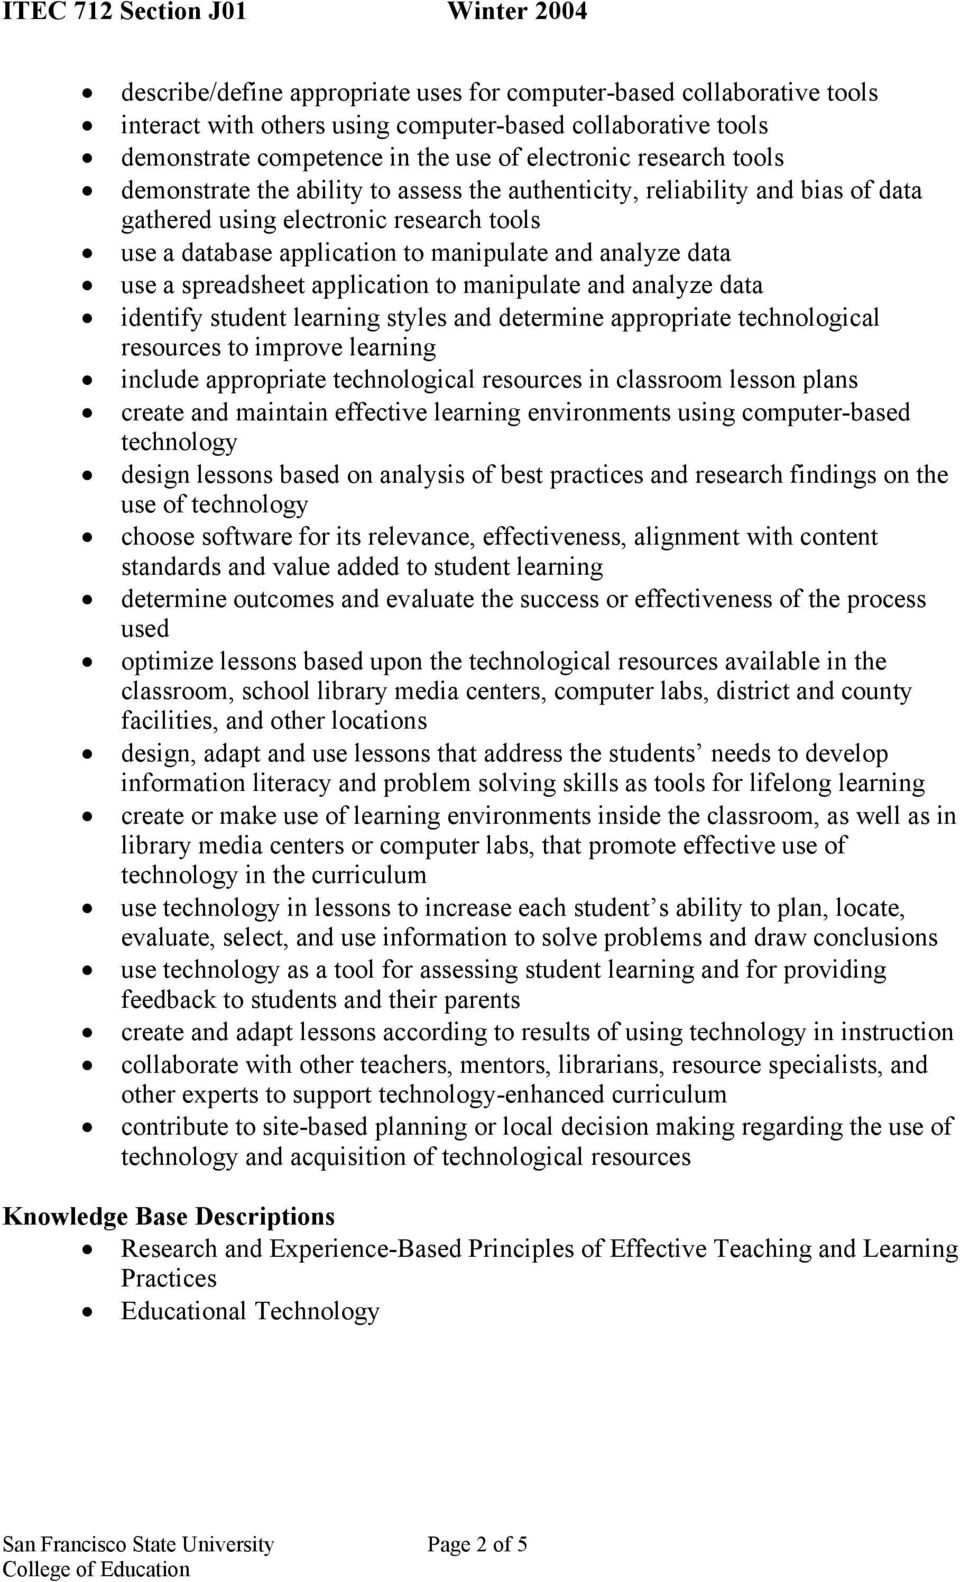 application to manipulate and analyze data identify student learning styles and determine appropriate technological resources to improve learning include appropriate technological resources in